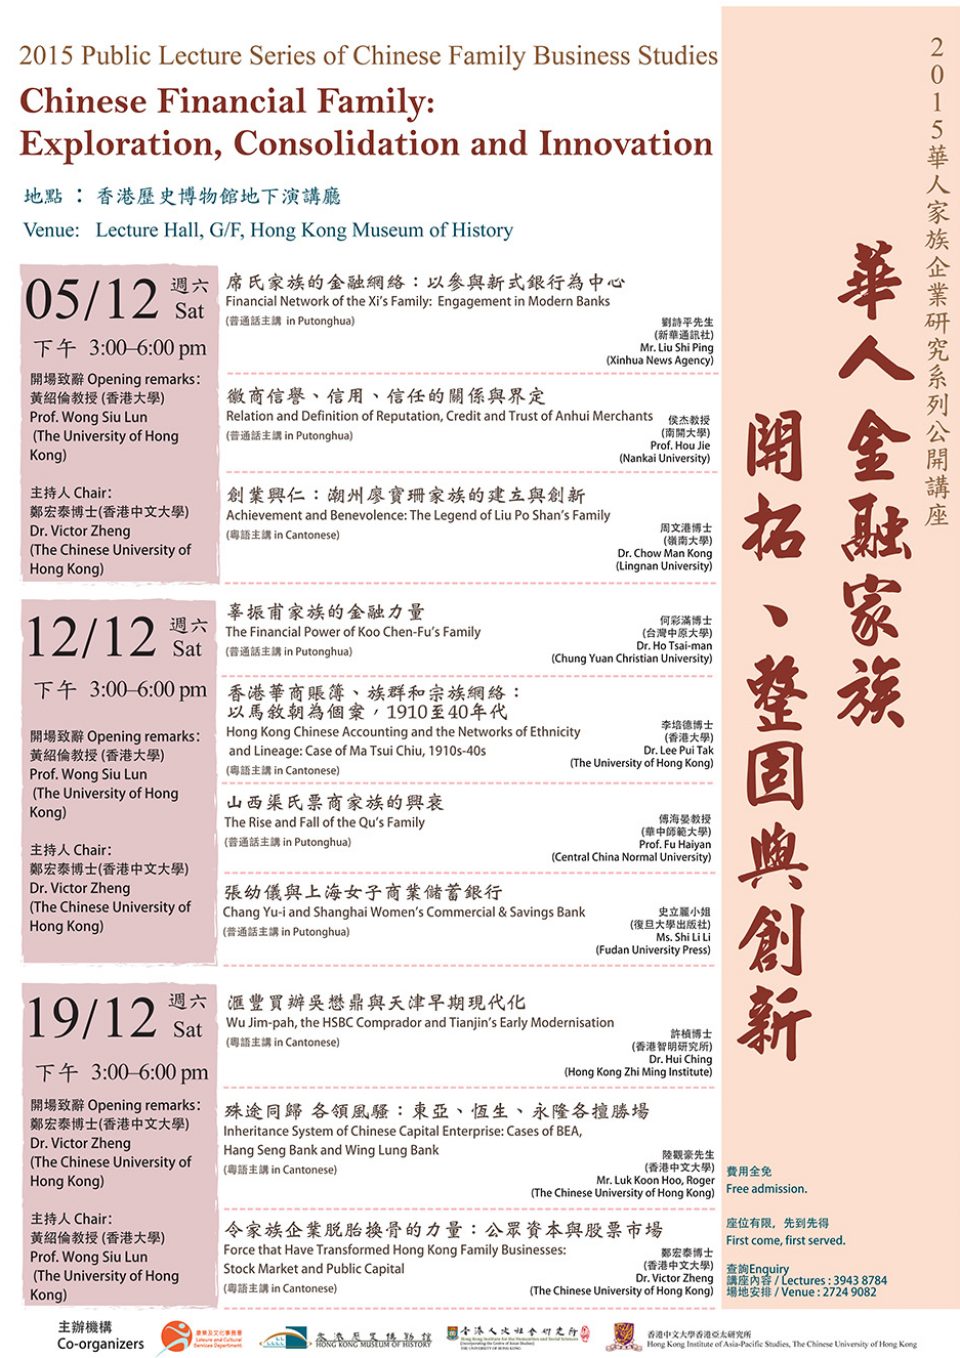 2015 Public Lecture Series of Chinese Family Business Studies – Chinese Financial Family: Exploration, Consolidation and Innovation (December 5, 12 & 19, 2015)